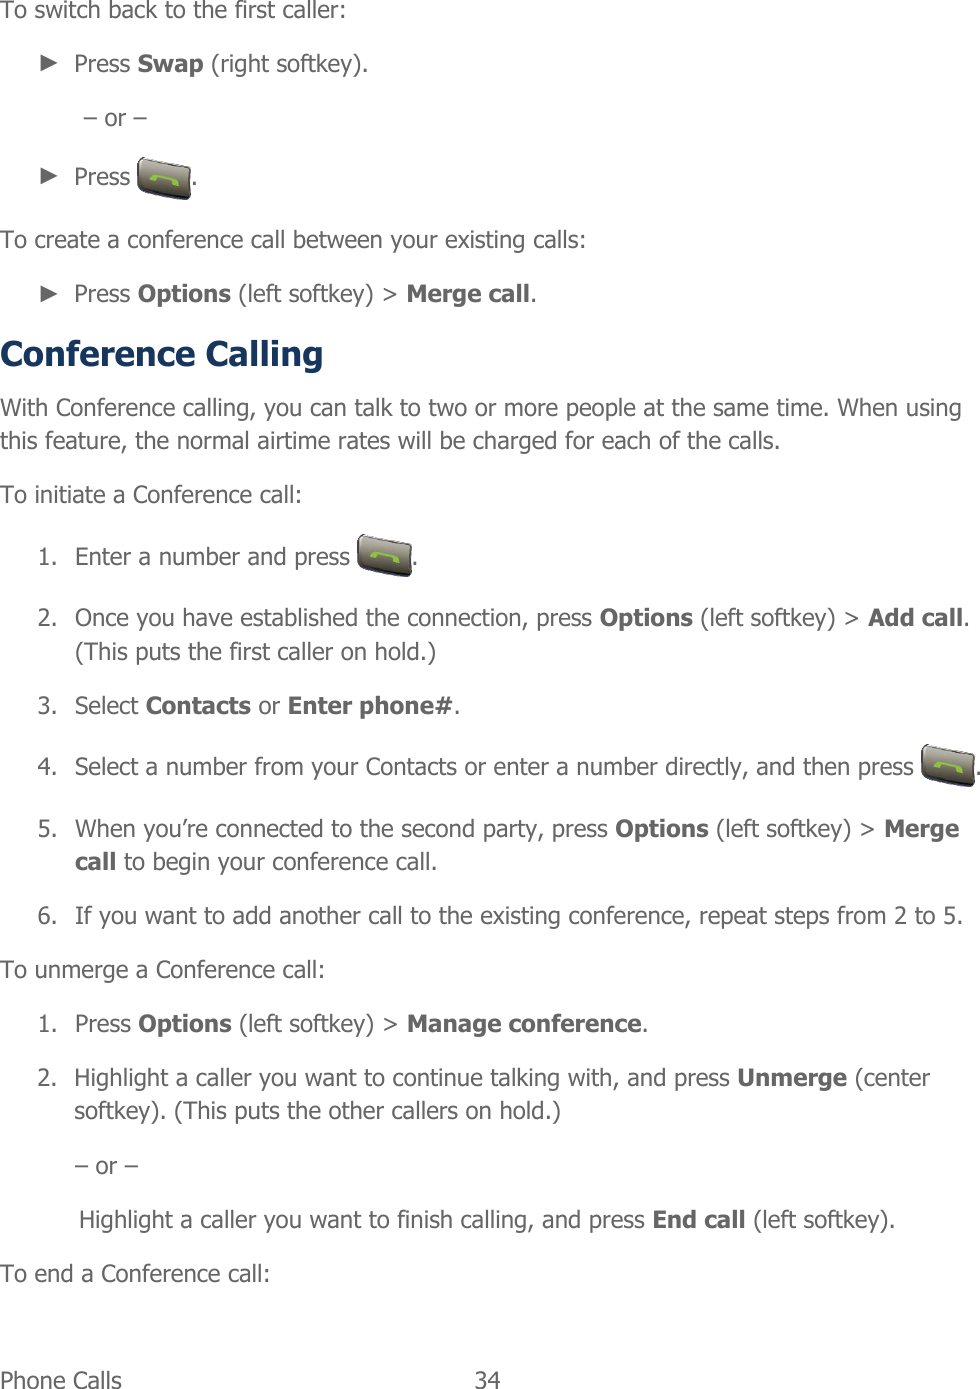  Phone Calls   34   To switch back to the first caller: ► Press Swap (right softkey). – or – ► Press  . To create a conference call between your existing calls: ► Press Options (left softkey) &gt; Merge call. Conference Calling With Conference calling, you can talk to two or more people at the same time. When using this feature, the normal airtime rates will be charged for each of the calls. To initiate a Conference call: 1. Enter a number and press  . 2. Once you have established the connection, press Options (left softkey) &gt; Add call. (This puts the first caller on hold.) 3. Select Contacts or Enter phone#. 4. Select a number from your Contacts or enter a number directly, and then press  . 5. When you’re connected to the second party, press Options (left softkey) &gt; Merge call to begin your conference call. 6. If you want to add another call to the existing conference, repeat steps from 2 to 5. To unmerge a Conference call: 1. Press Options (left softkey) &gt; Manage conference. 2. Highlight a caller you want to continue talking with, and press Unmerge (center softkey). (This puts the other callers on hold.) – or – Highlight a caller you want to finish calling, and press End call (left softkey). To end a Conference call: 